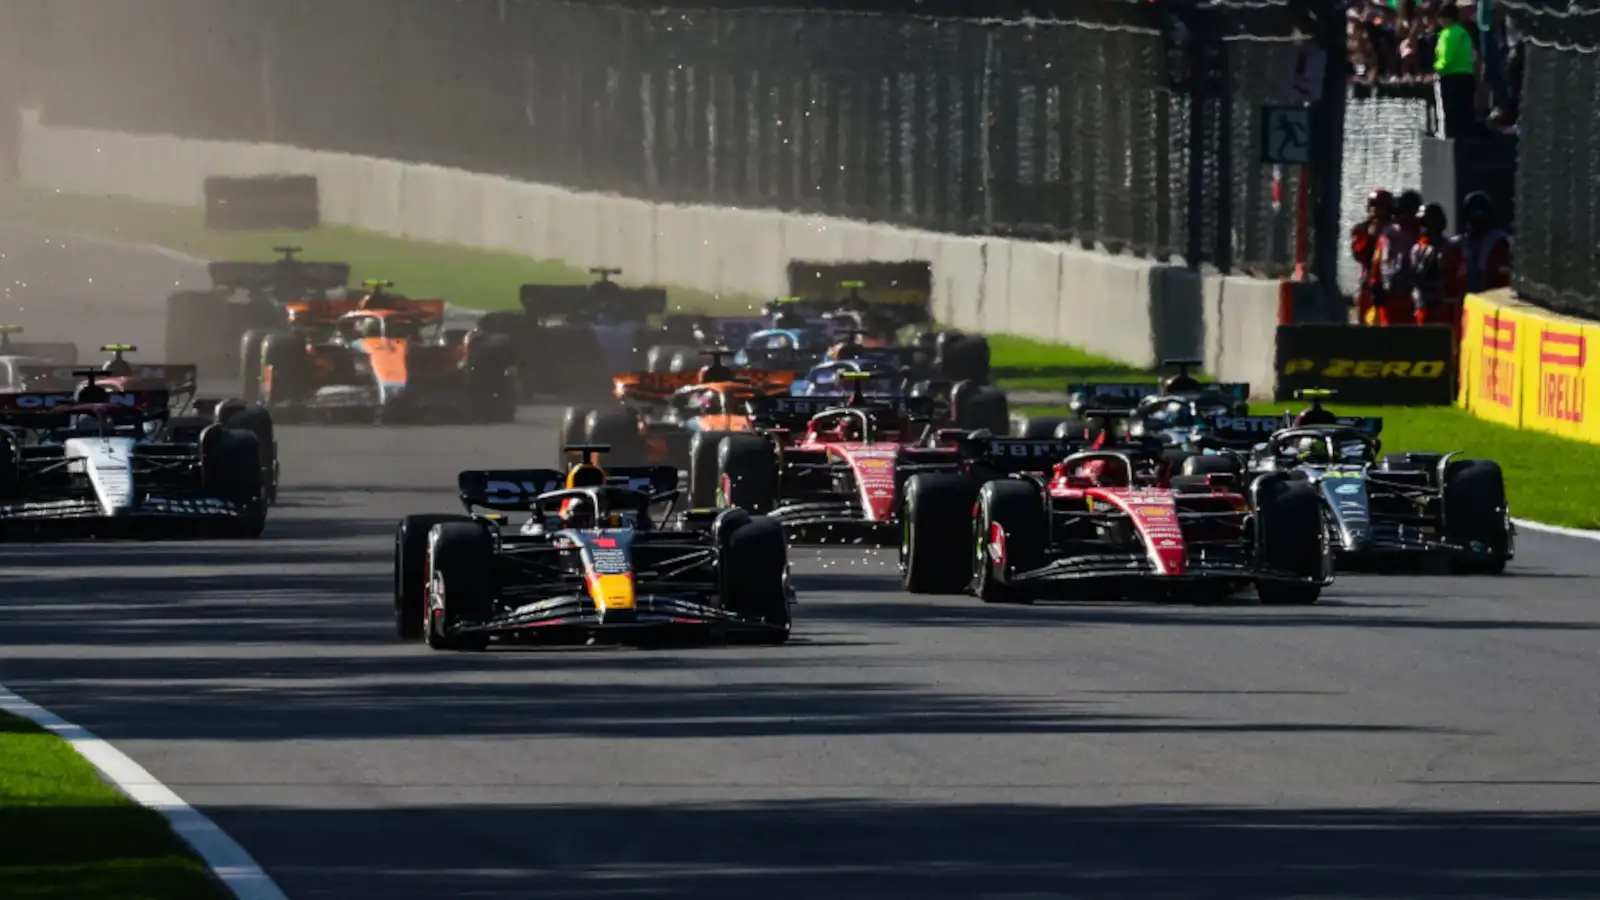 Restart in Mexico with Max Verstappen pulling away from Charles Leclerc.